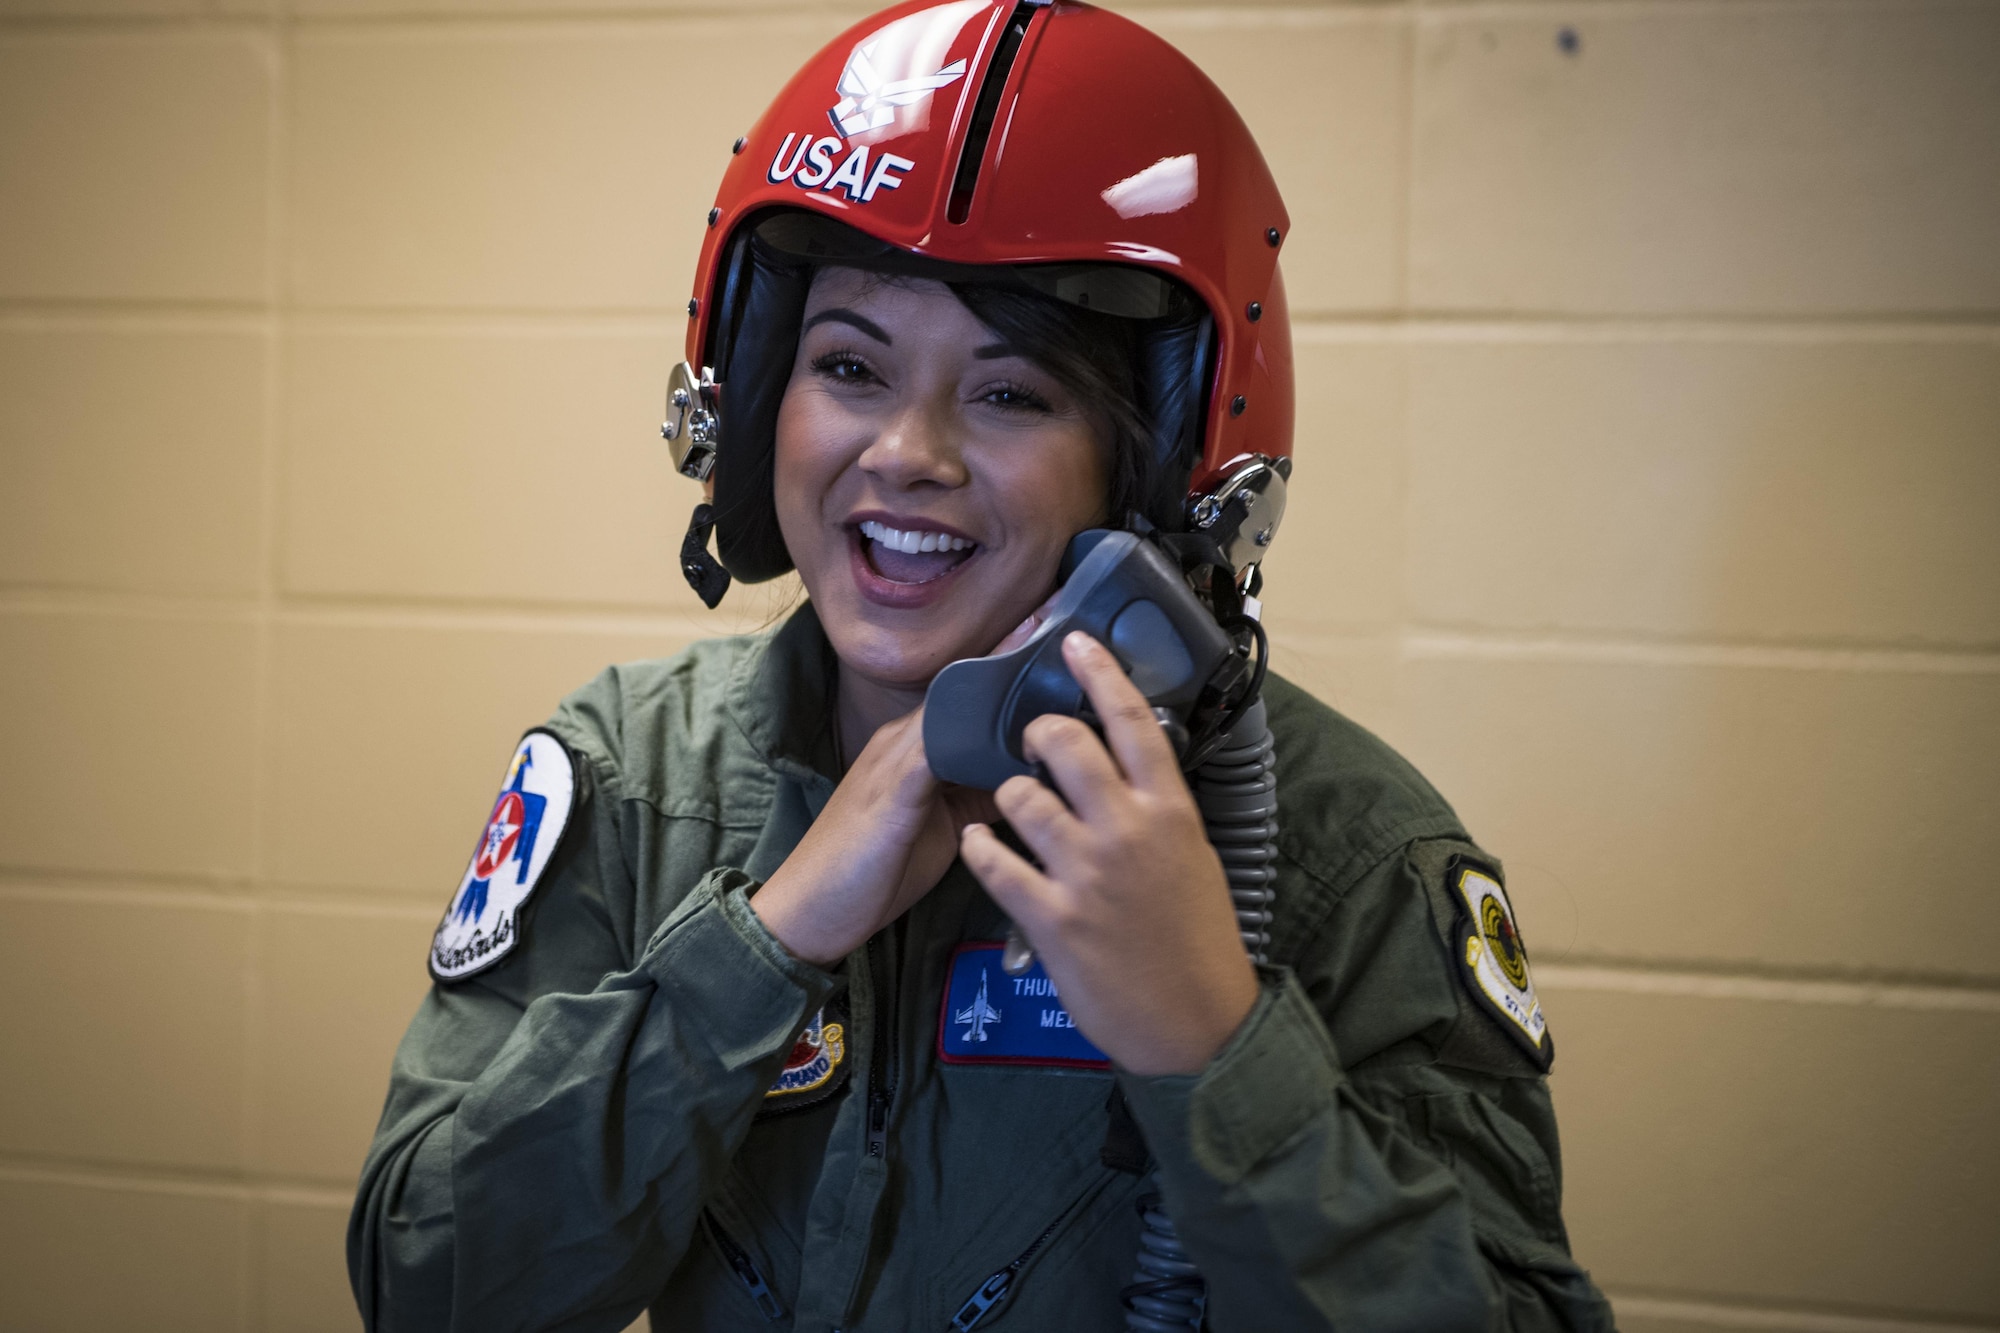 Noelani Mathews, multimedia journalist, laughs while trying on her helmet before her media flight with the U.S. Air Force Thunderbirds, Oct. 27, 2017, at Moody Air Force Base, Ga. The Thunderbirds, based out of Nellis Air Force Base, Nev., are the Air Force’s premier aerial demonstration team, performing at air shows and special events worldwide. (U.S. Air Force photo by Senior Airman Janiqua P. Robinson)